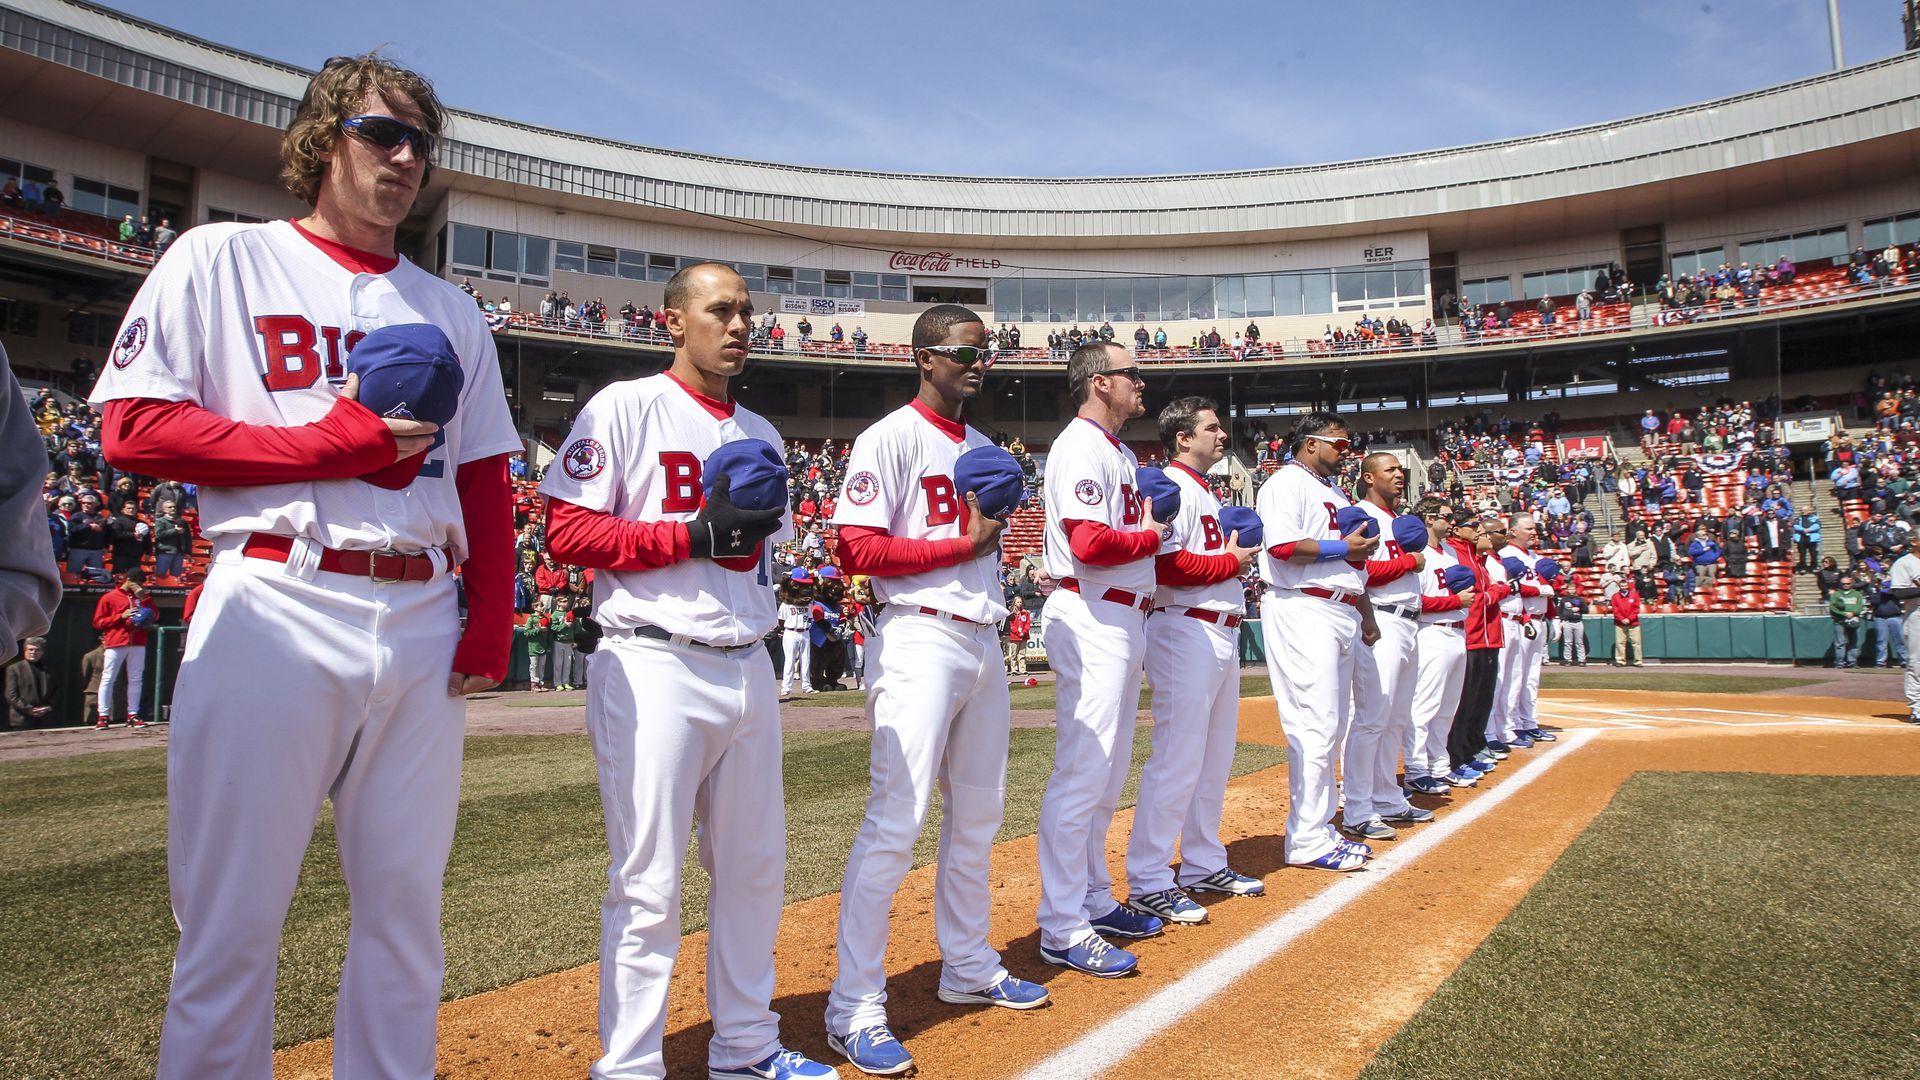 The Buffalo Bisons (Blue Jays Triple-A affiliate) on Opening Day last season. Photo: David Cooper/Toronto Star via Getty Images